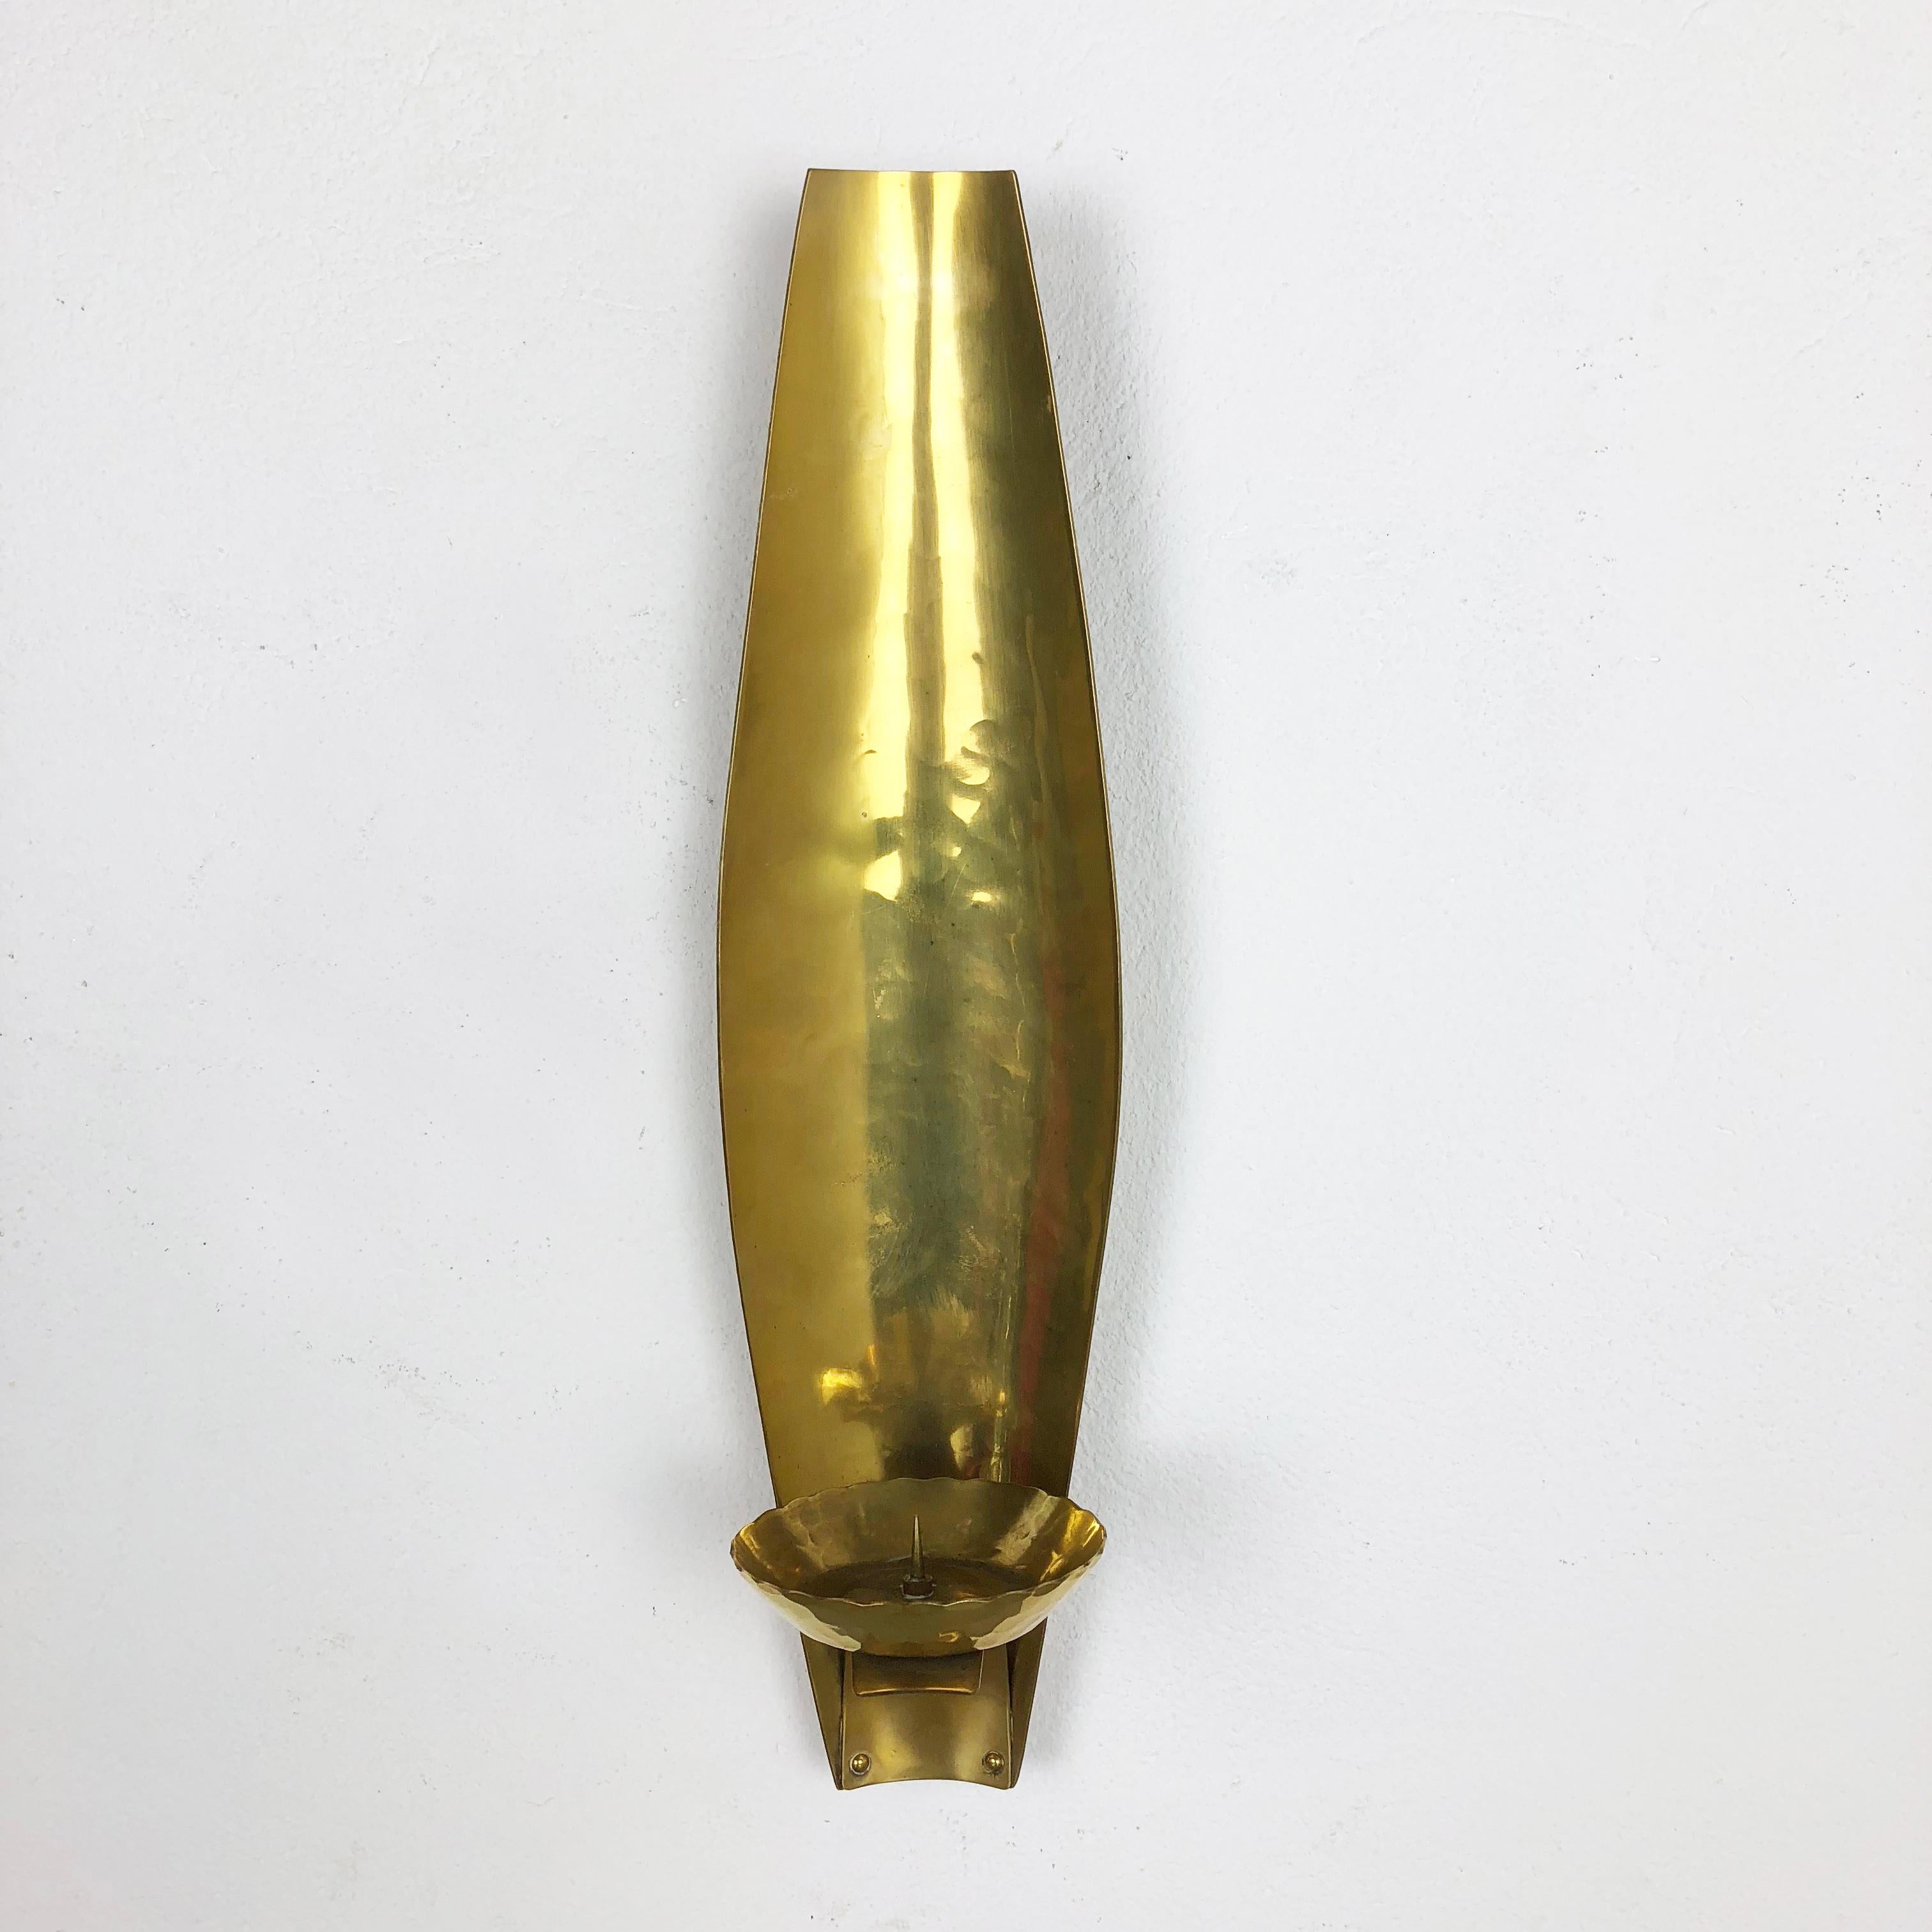 Brutalist Brass Wall Candleholder by Emil Funk KG, Germany, 1950s For Sale 9